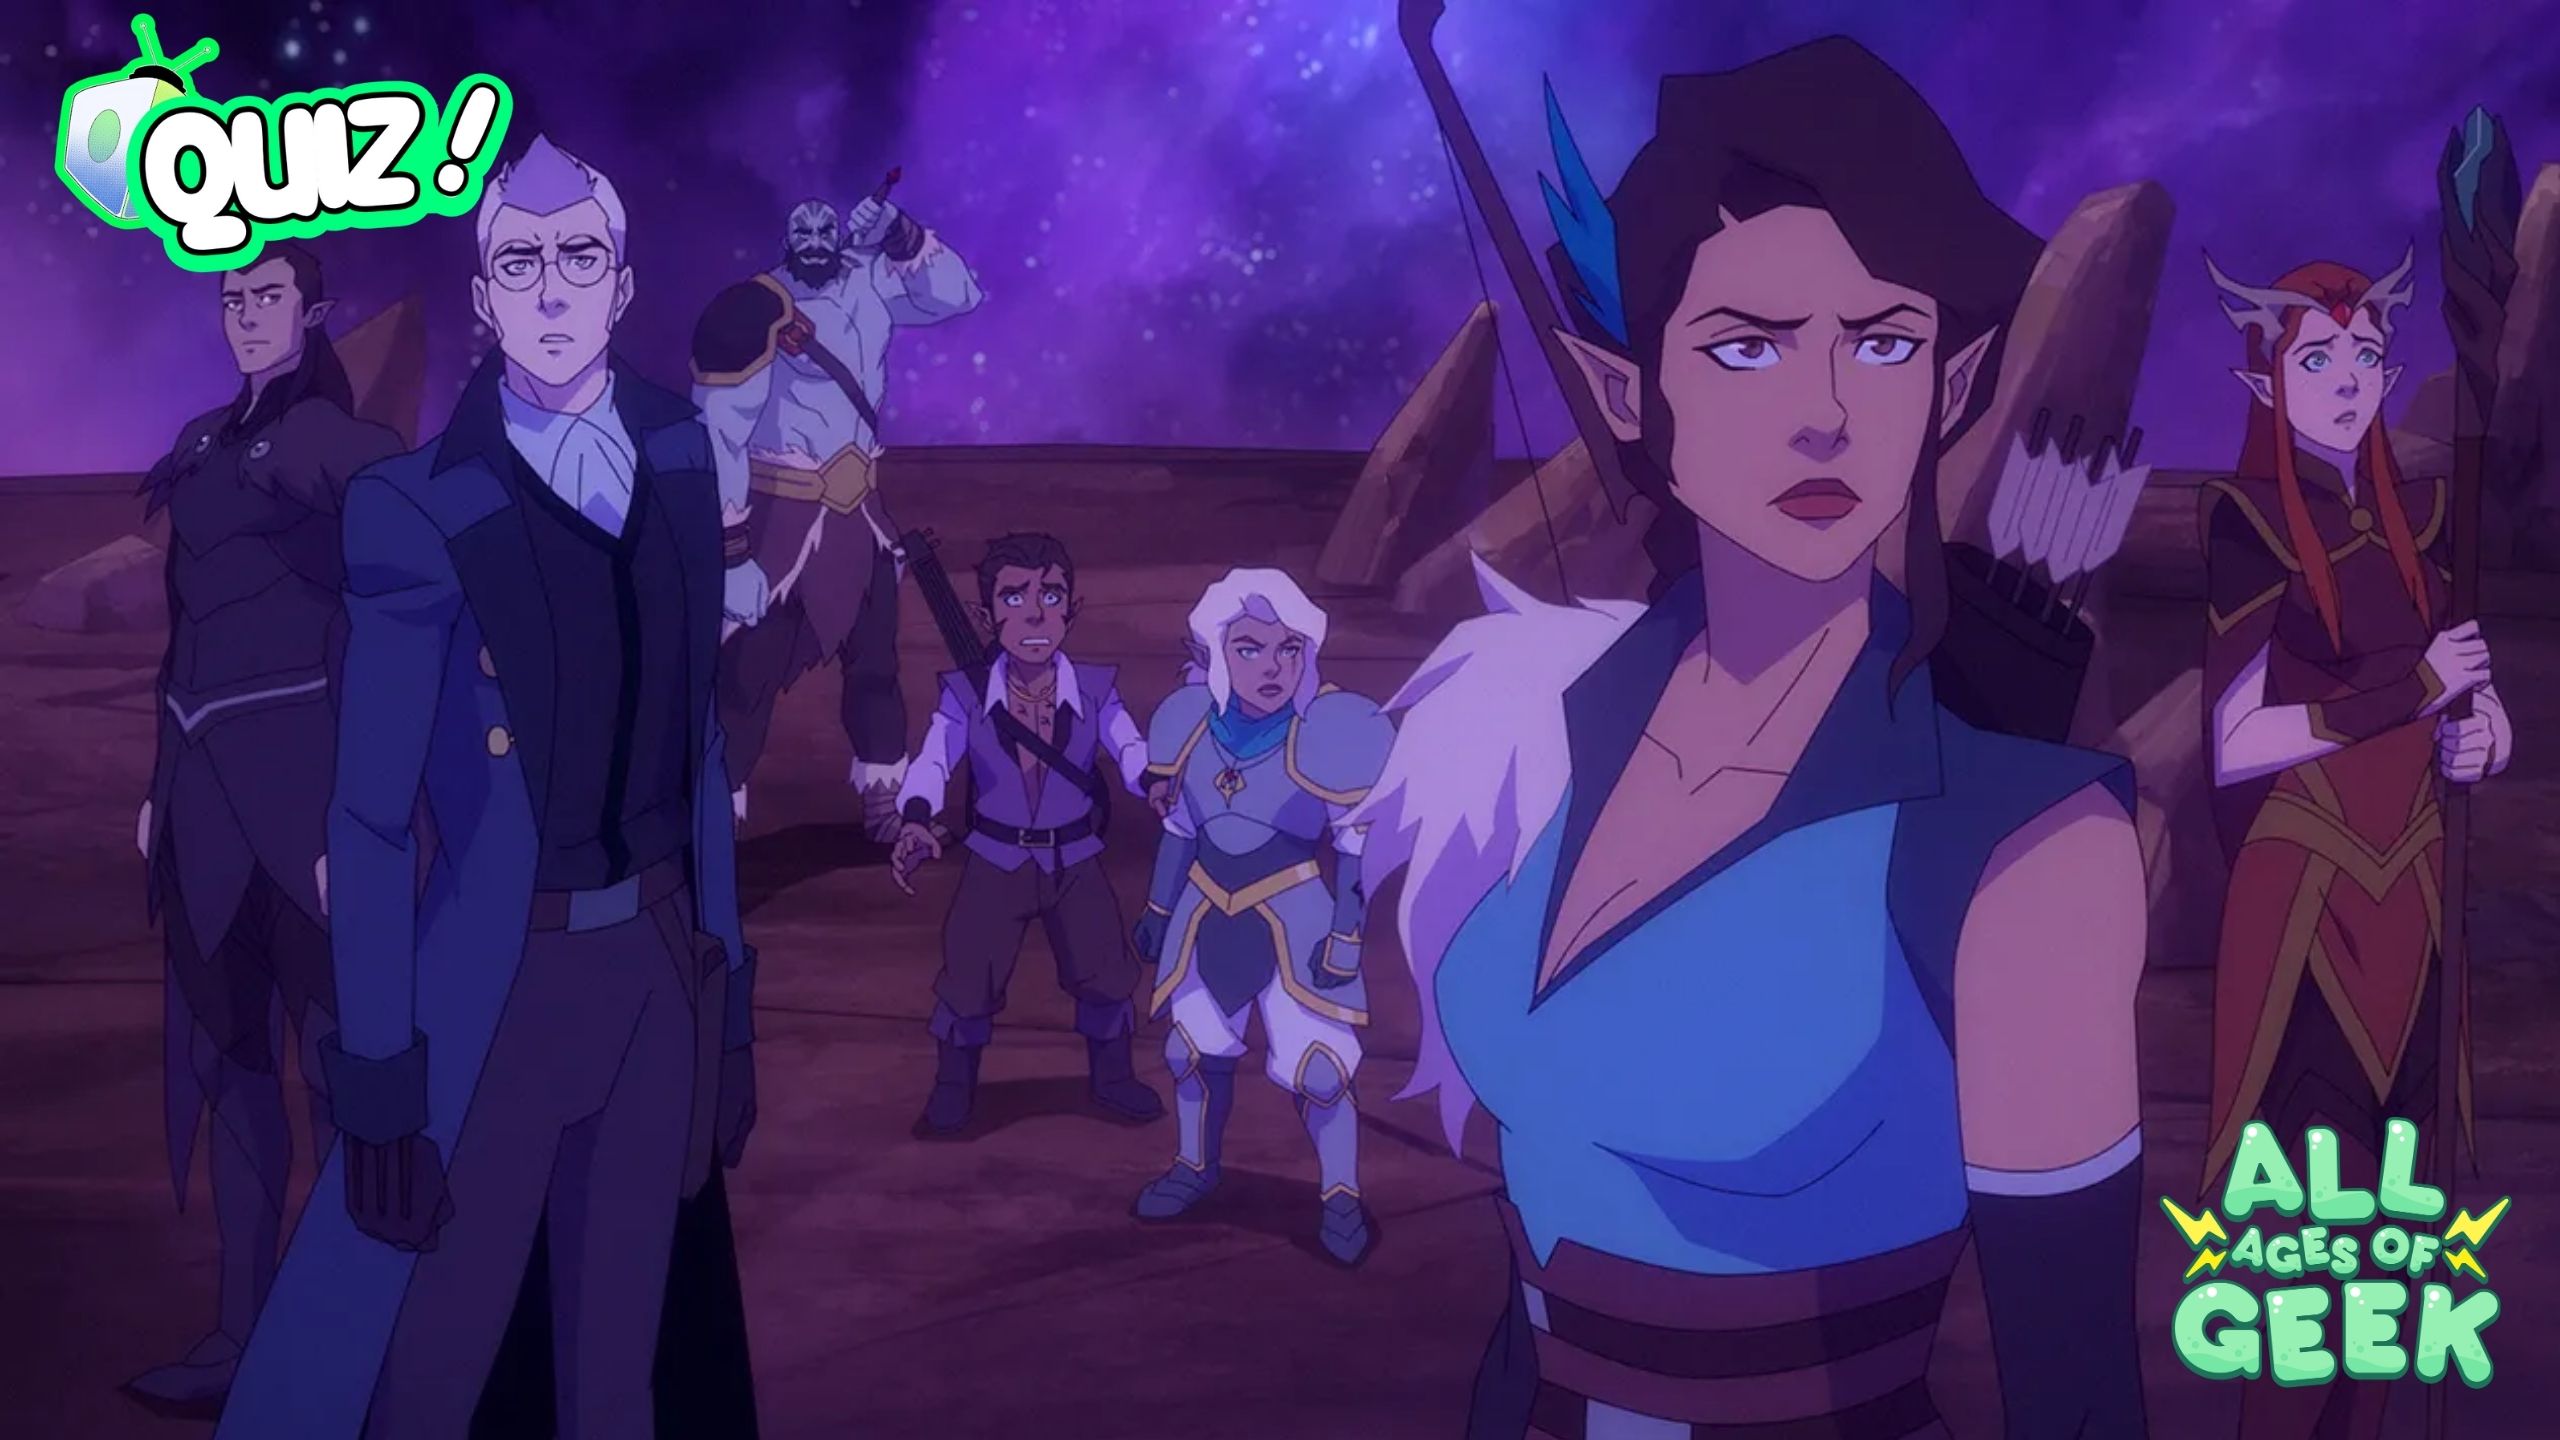 Which “The Legend of Vox Machina” Character Are You? Take the Quiz to Find Out!